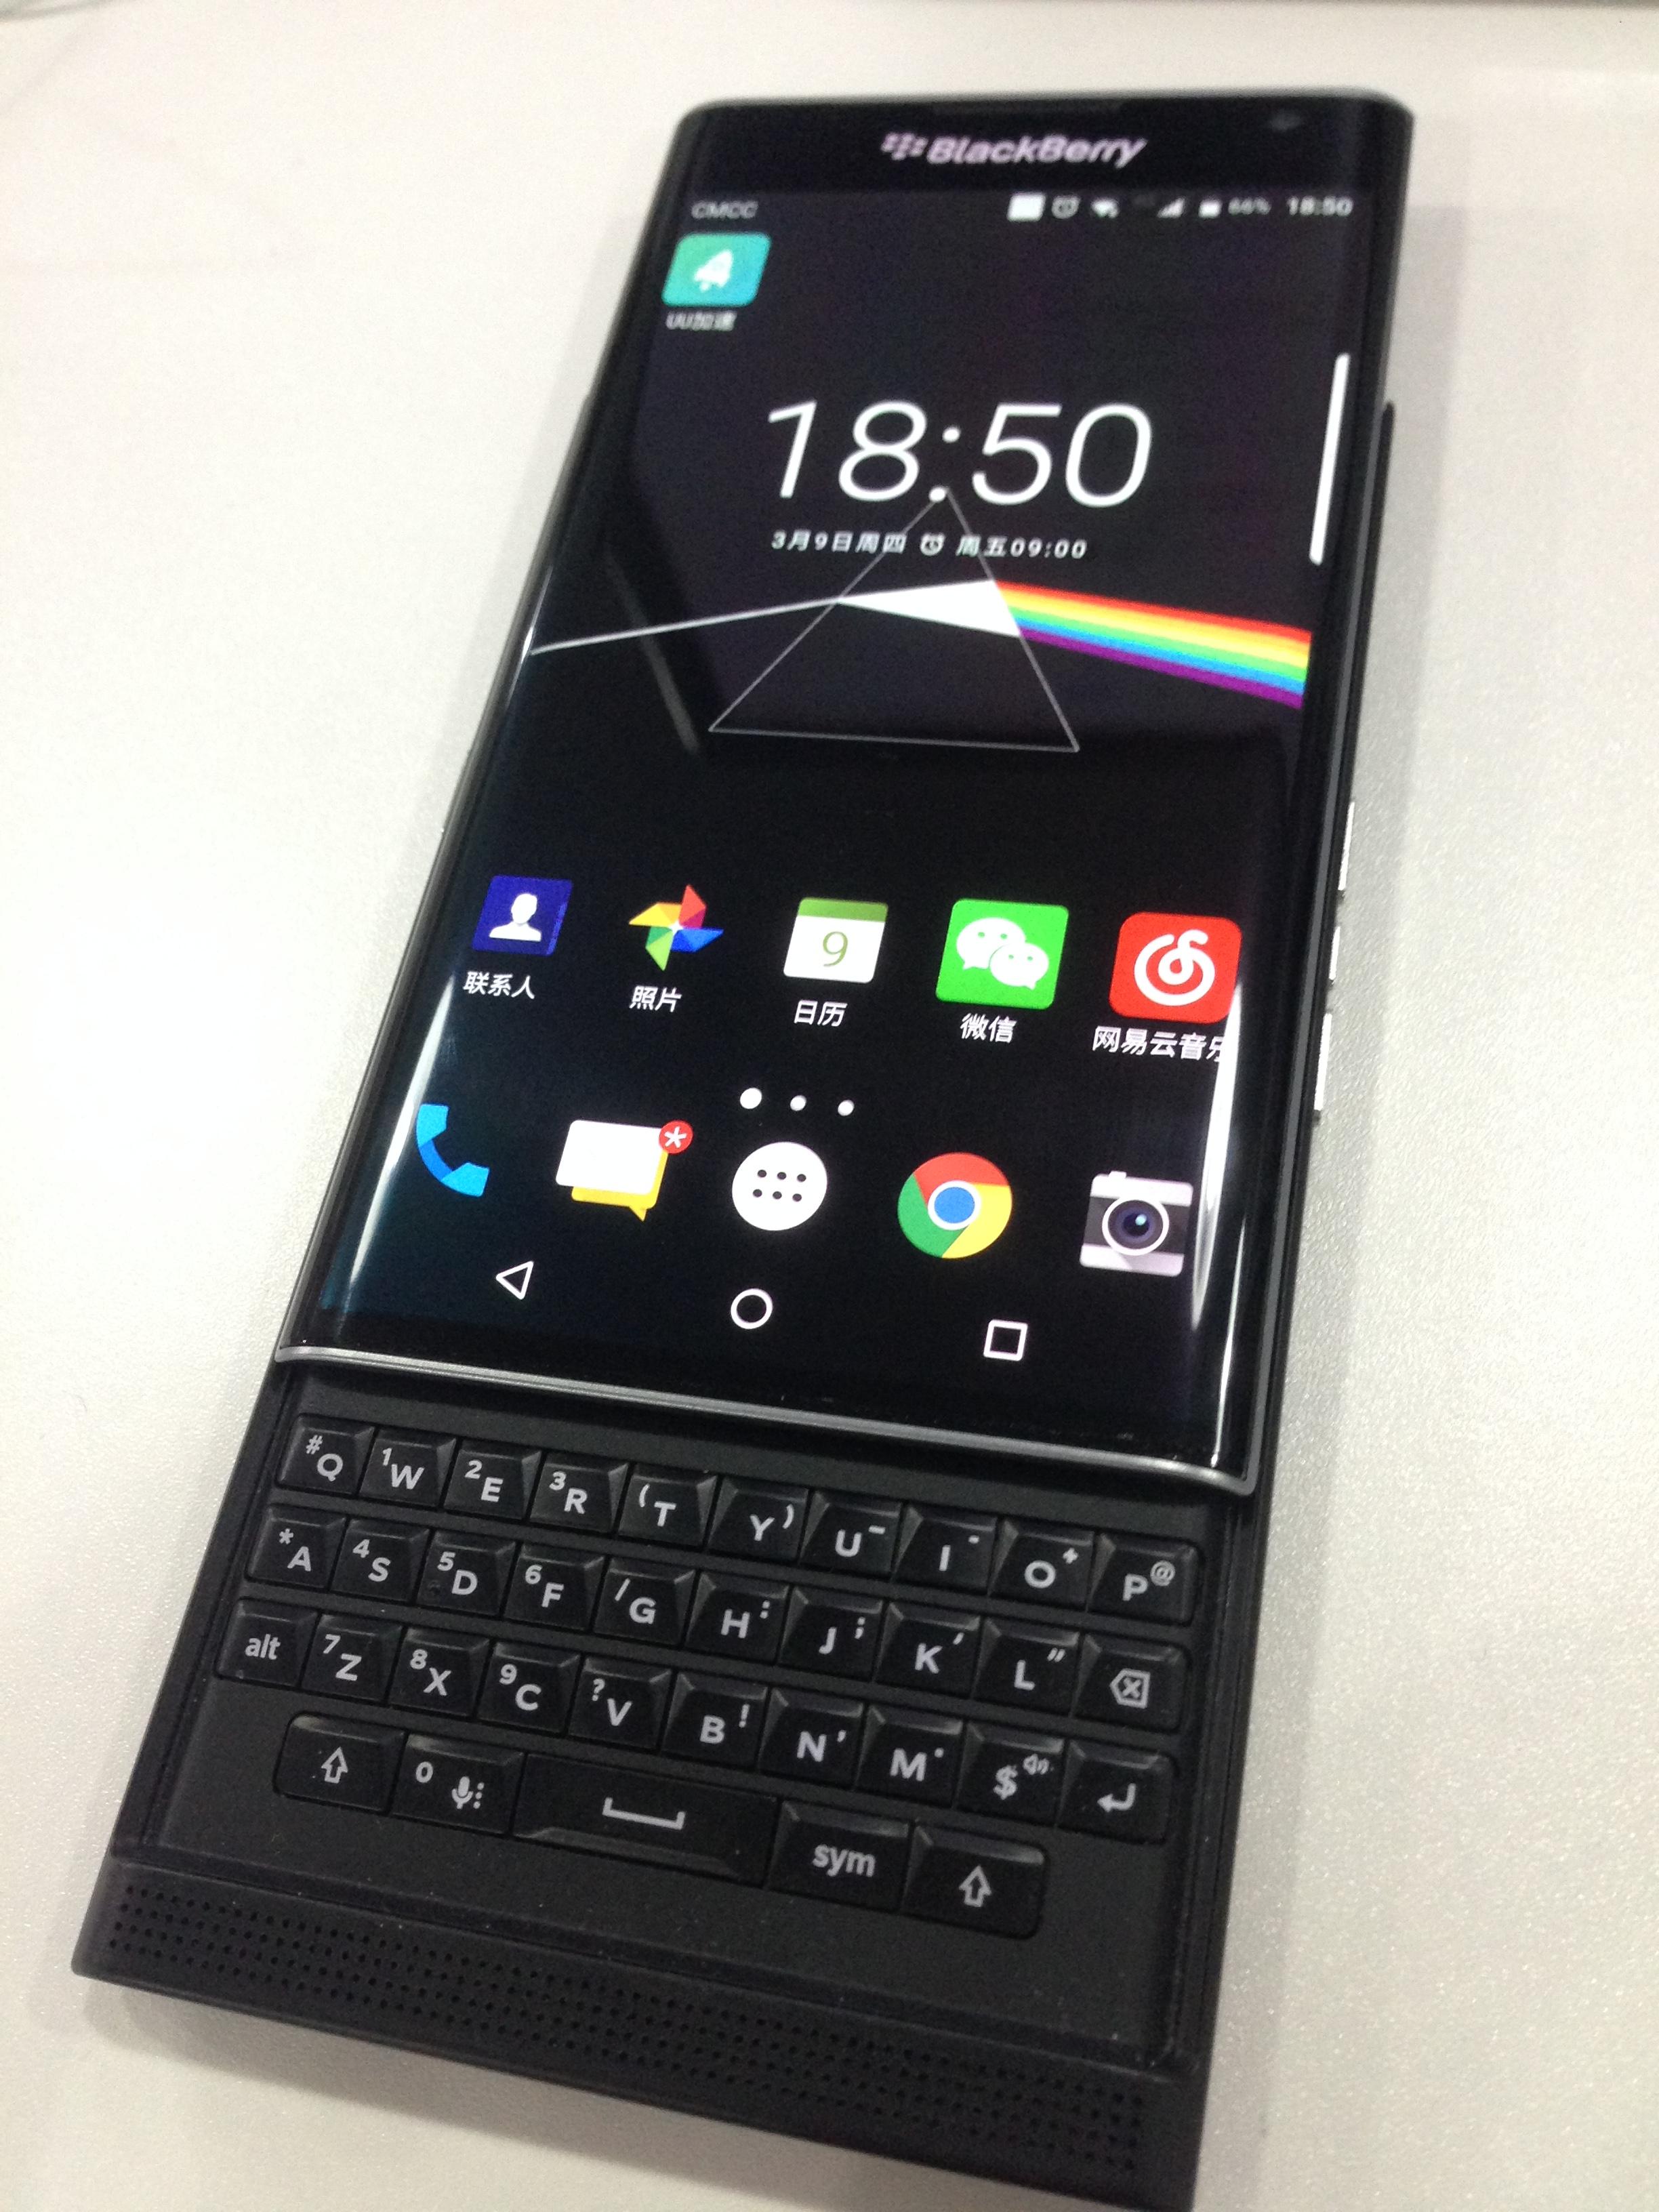 BlackBerry Q10 Review - The Return of the QWERTY King | GearDiary